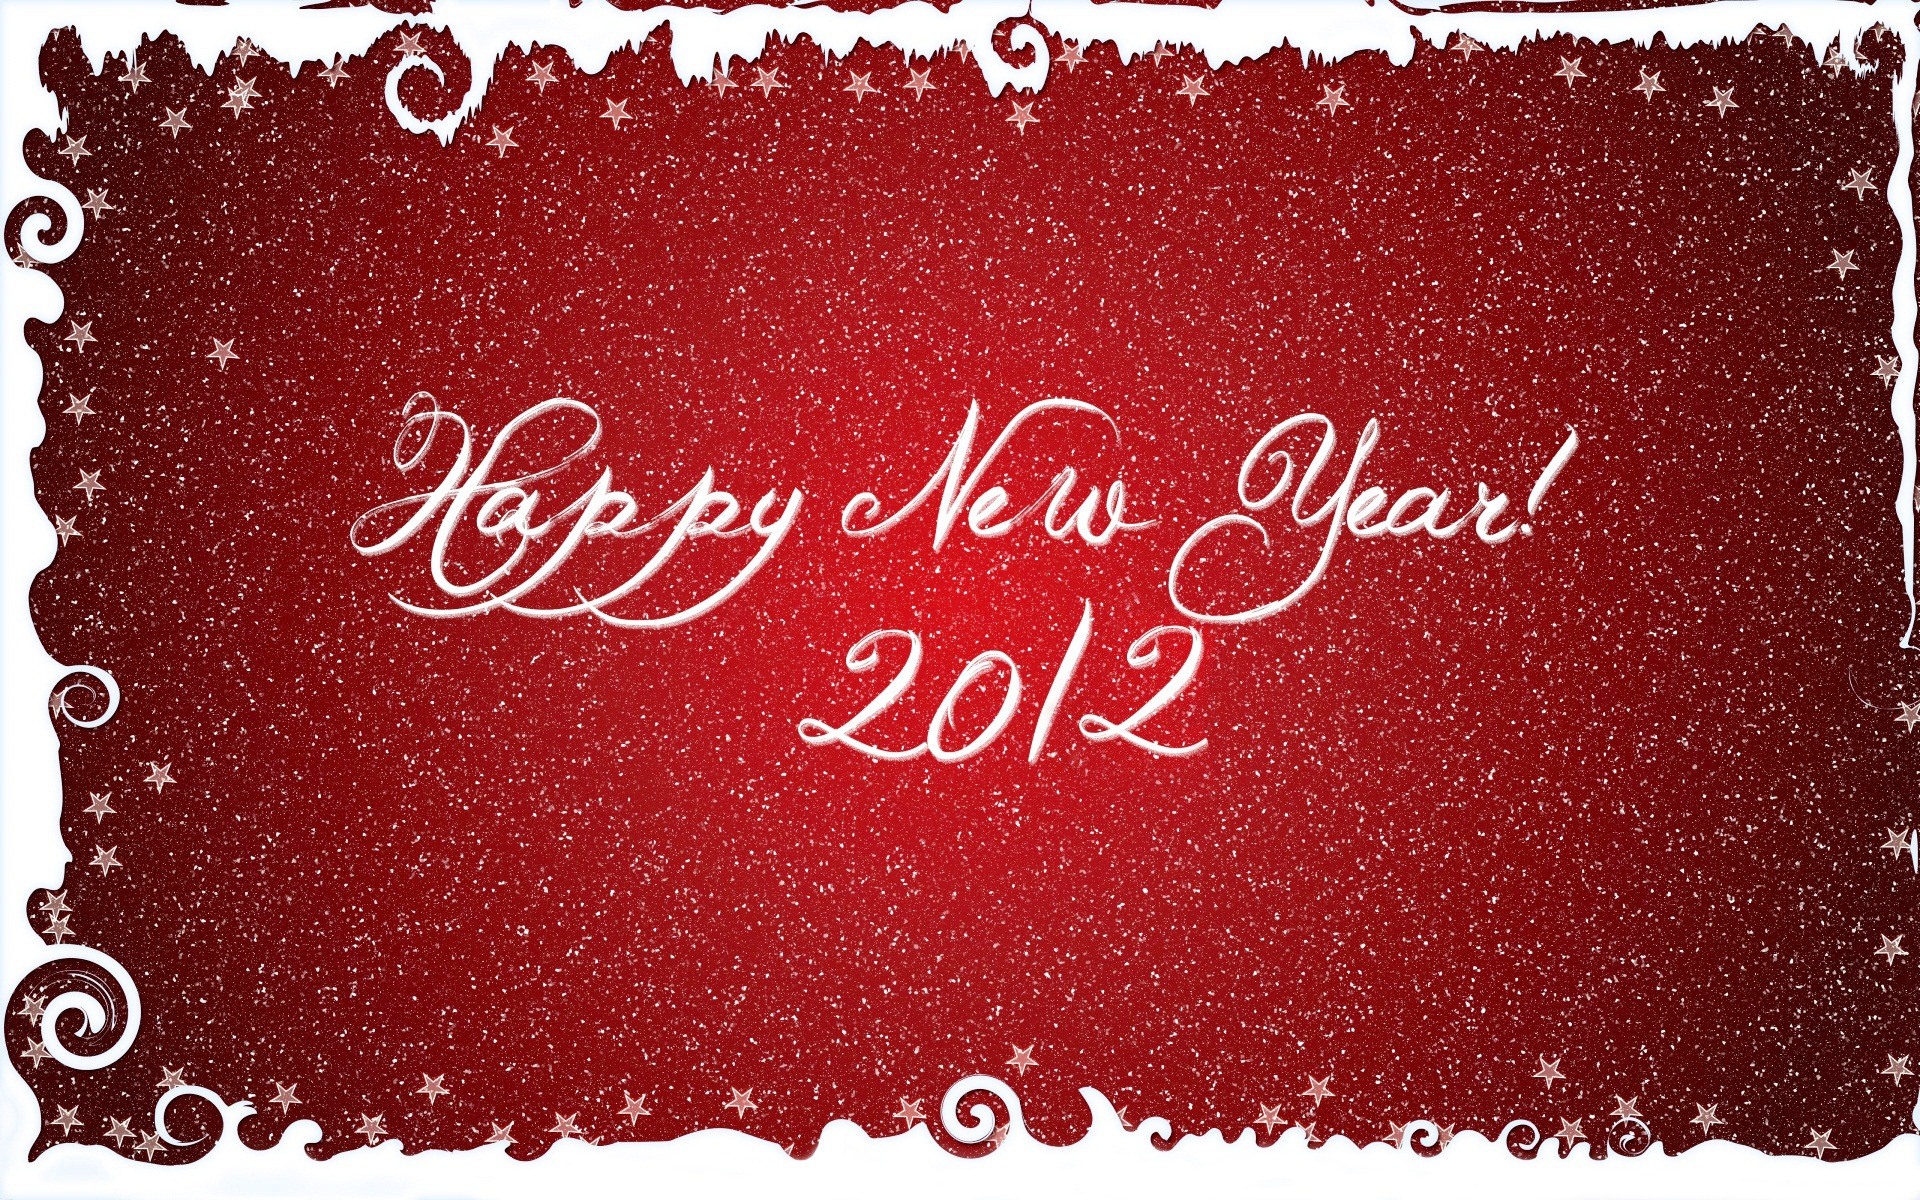 2012 New Year wallpapers (2) #6 - 1920x1200